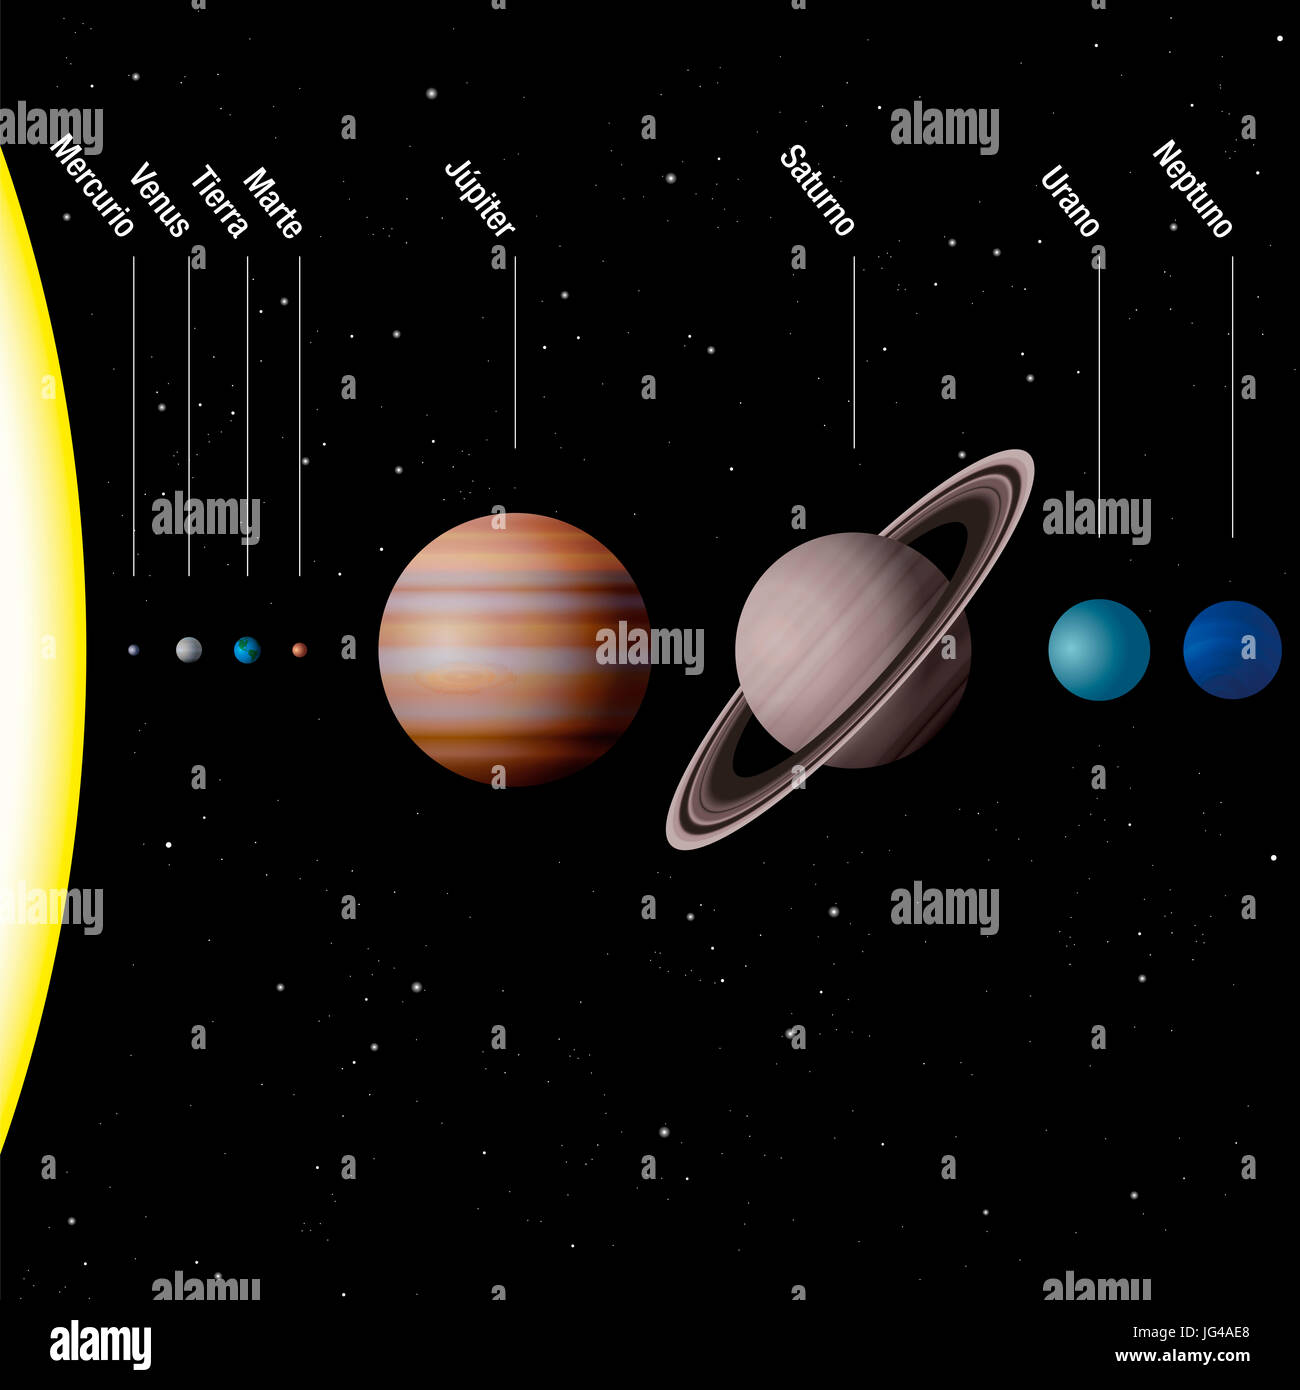 Planets of our solar system, SPANISH LABELING - true to scale - Sun and eight planets Mercury, Venus, Earth, Mars, Jupiter, Saturn, Uranus, Neptune. Stock Photo